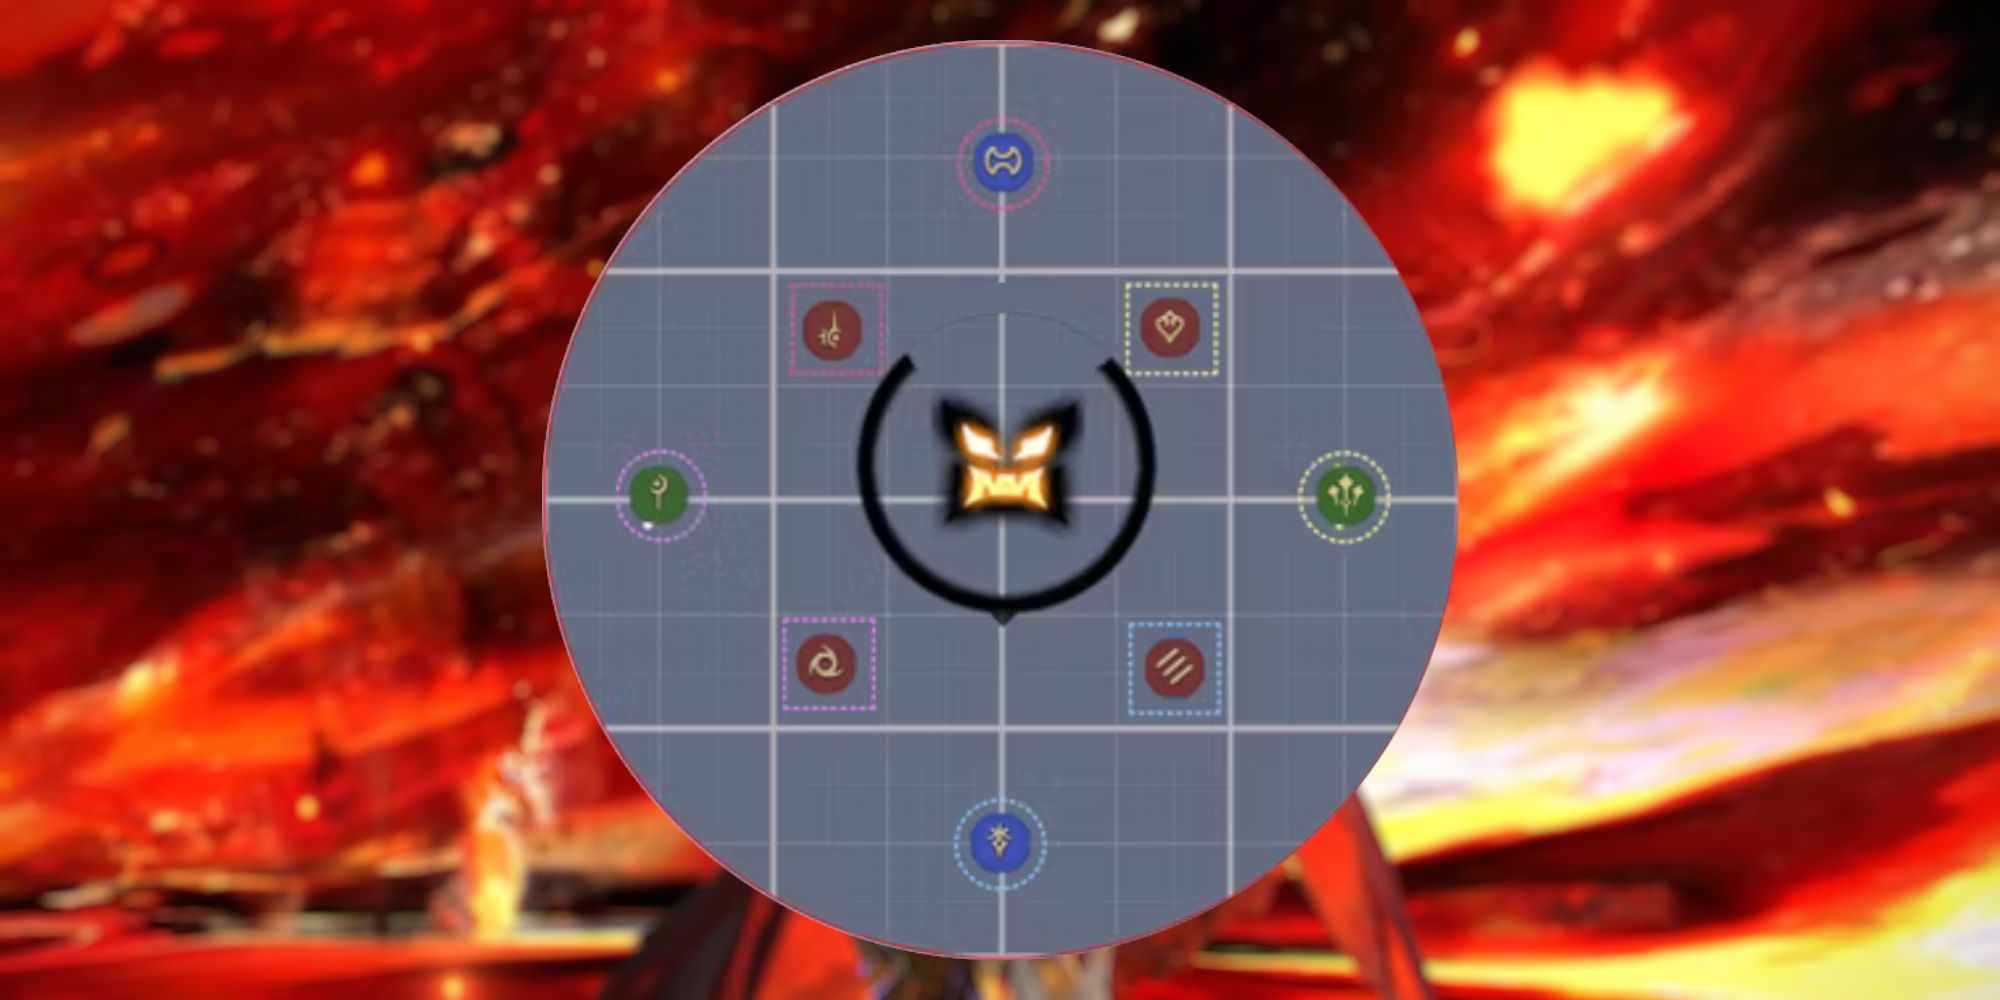 Setting up the Clock Positions in the Mount Ordeals Extreme Trial. This consists of spreading out the Jobs in marked areas found in the cardinal and intercardinal directions, allowing you to get the most out of each role in Final Fantasy 14